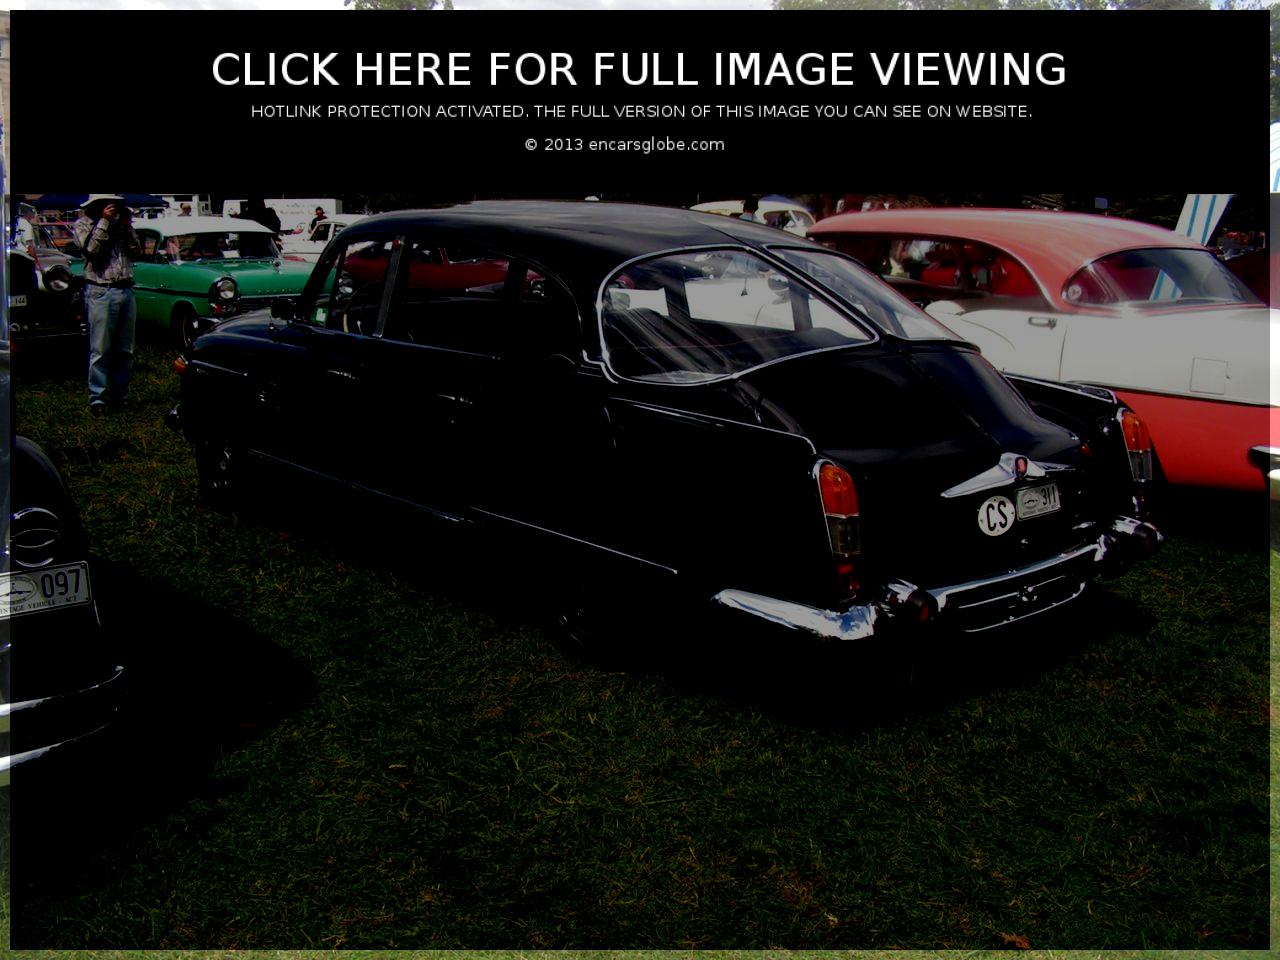 Tatra 603-2: Photo gallery, complete information about model ...